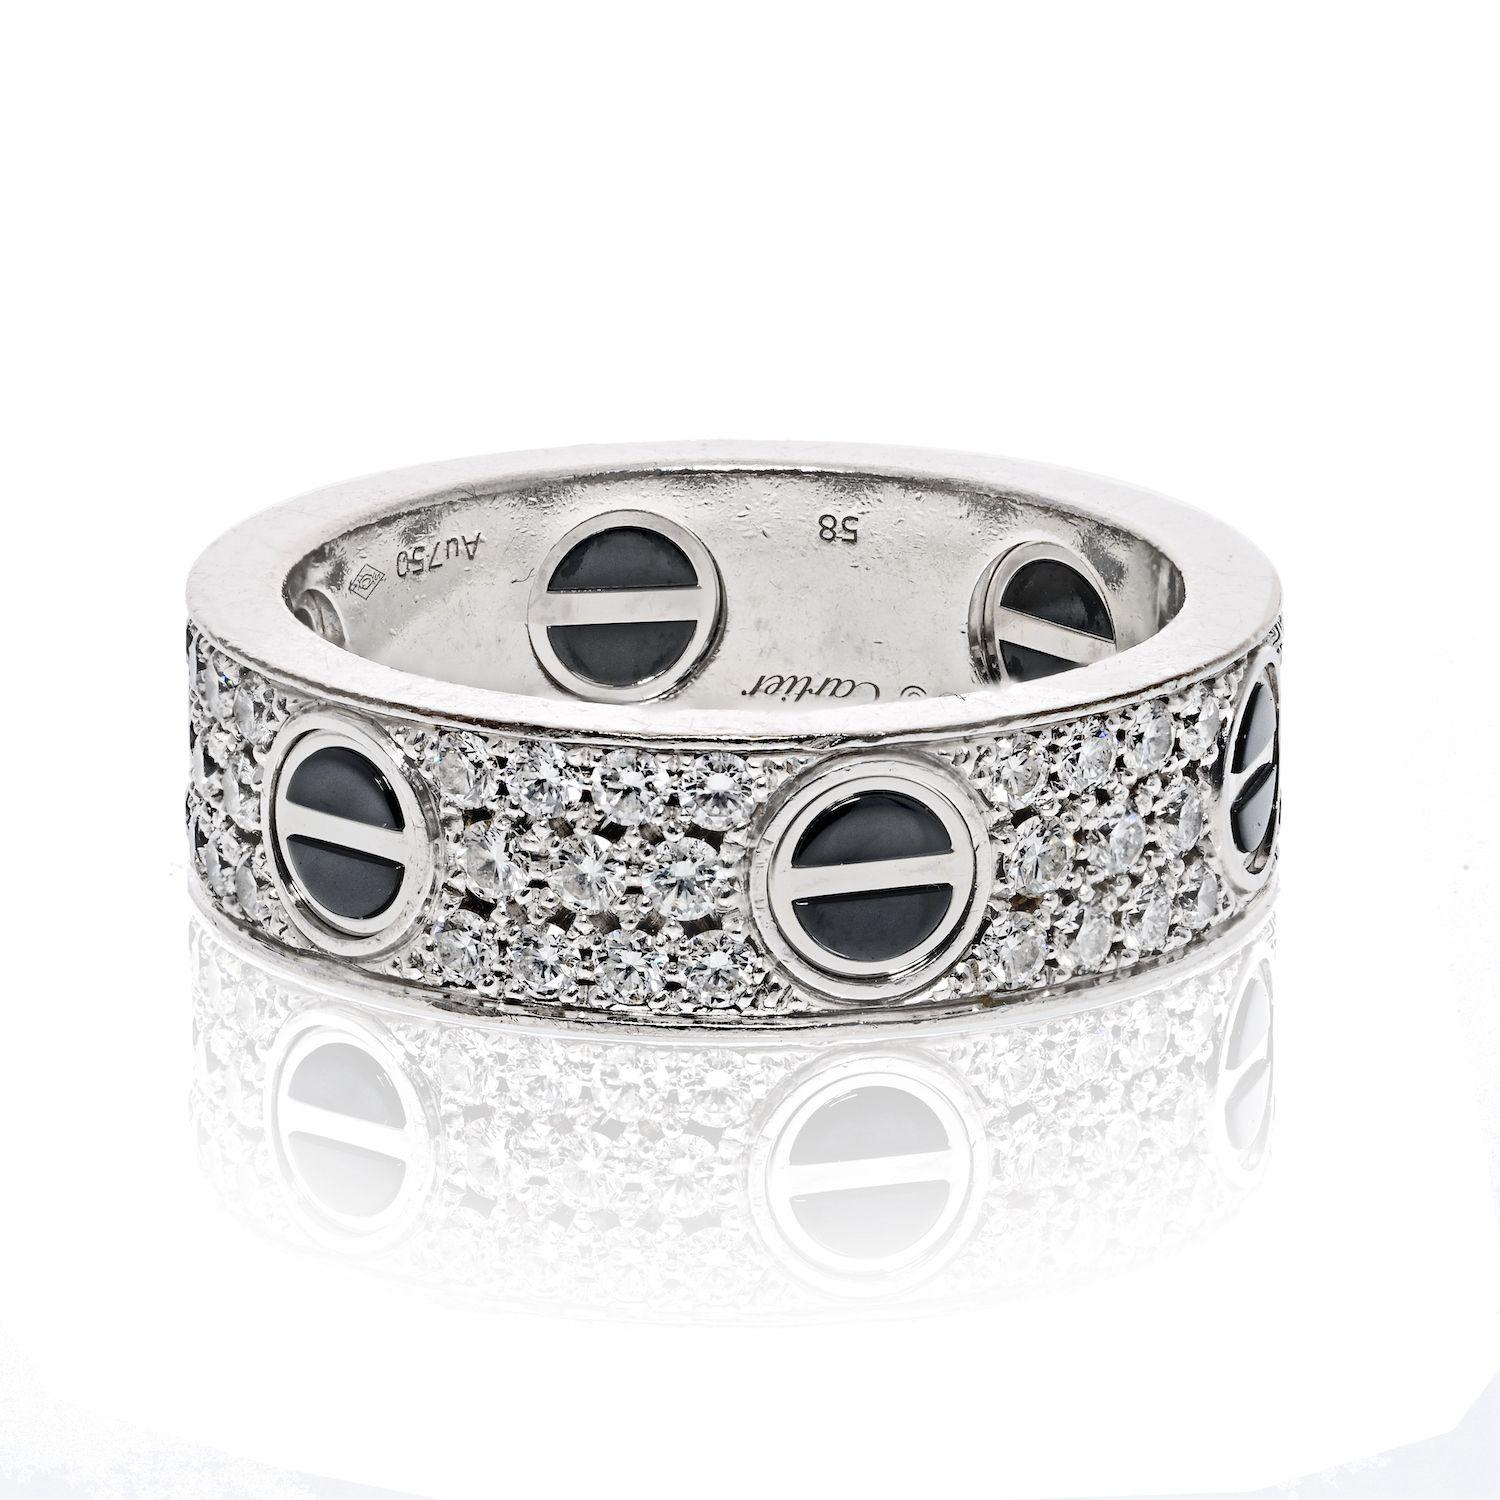 The pre-loved Cartier Love Ceramic Ring is a stunning piece of jewelry that exudes elegance and sophistication. Crafted in 18K white gold (750/1000) and black ceramic, it seamlessly combines luxurious materials for a striking contrast. This LOVE